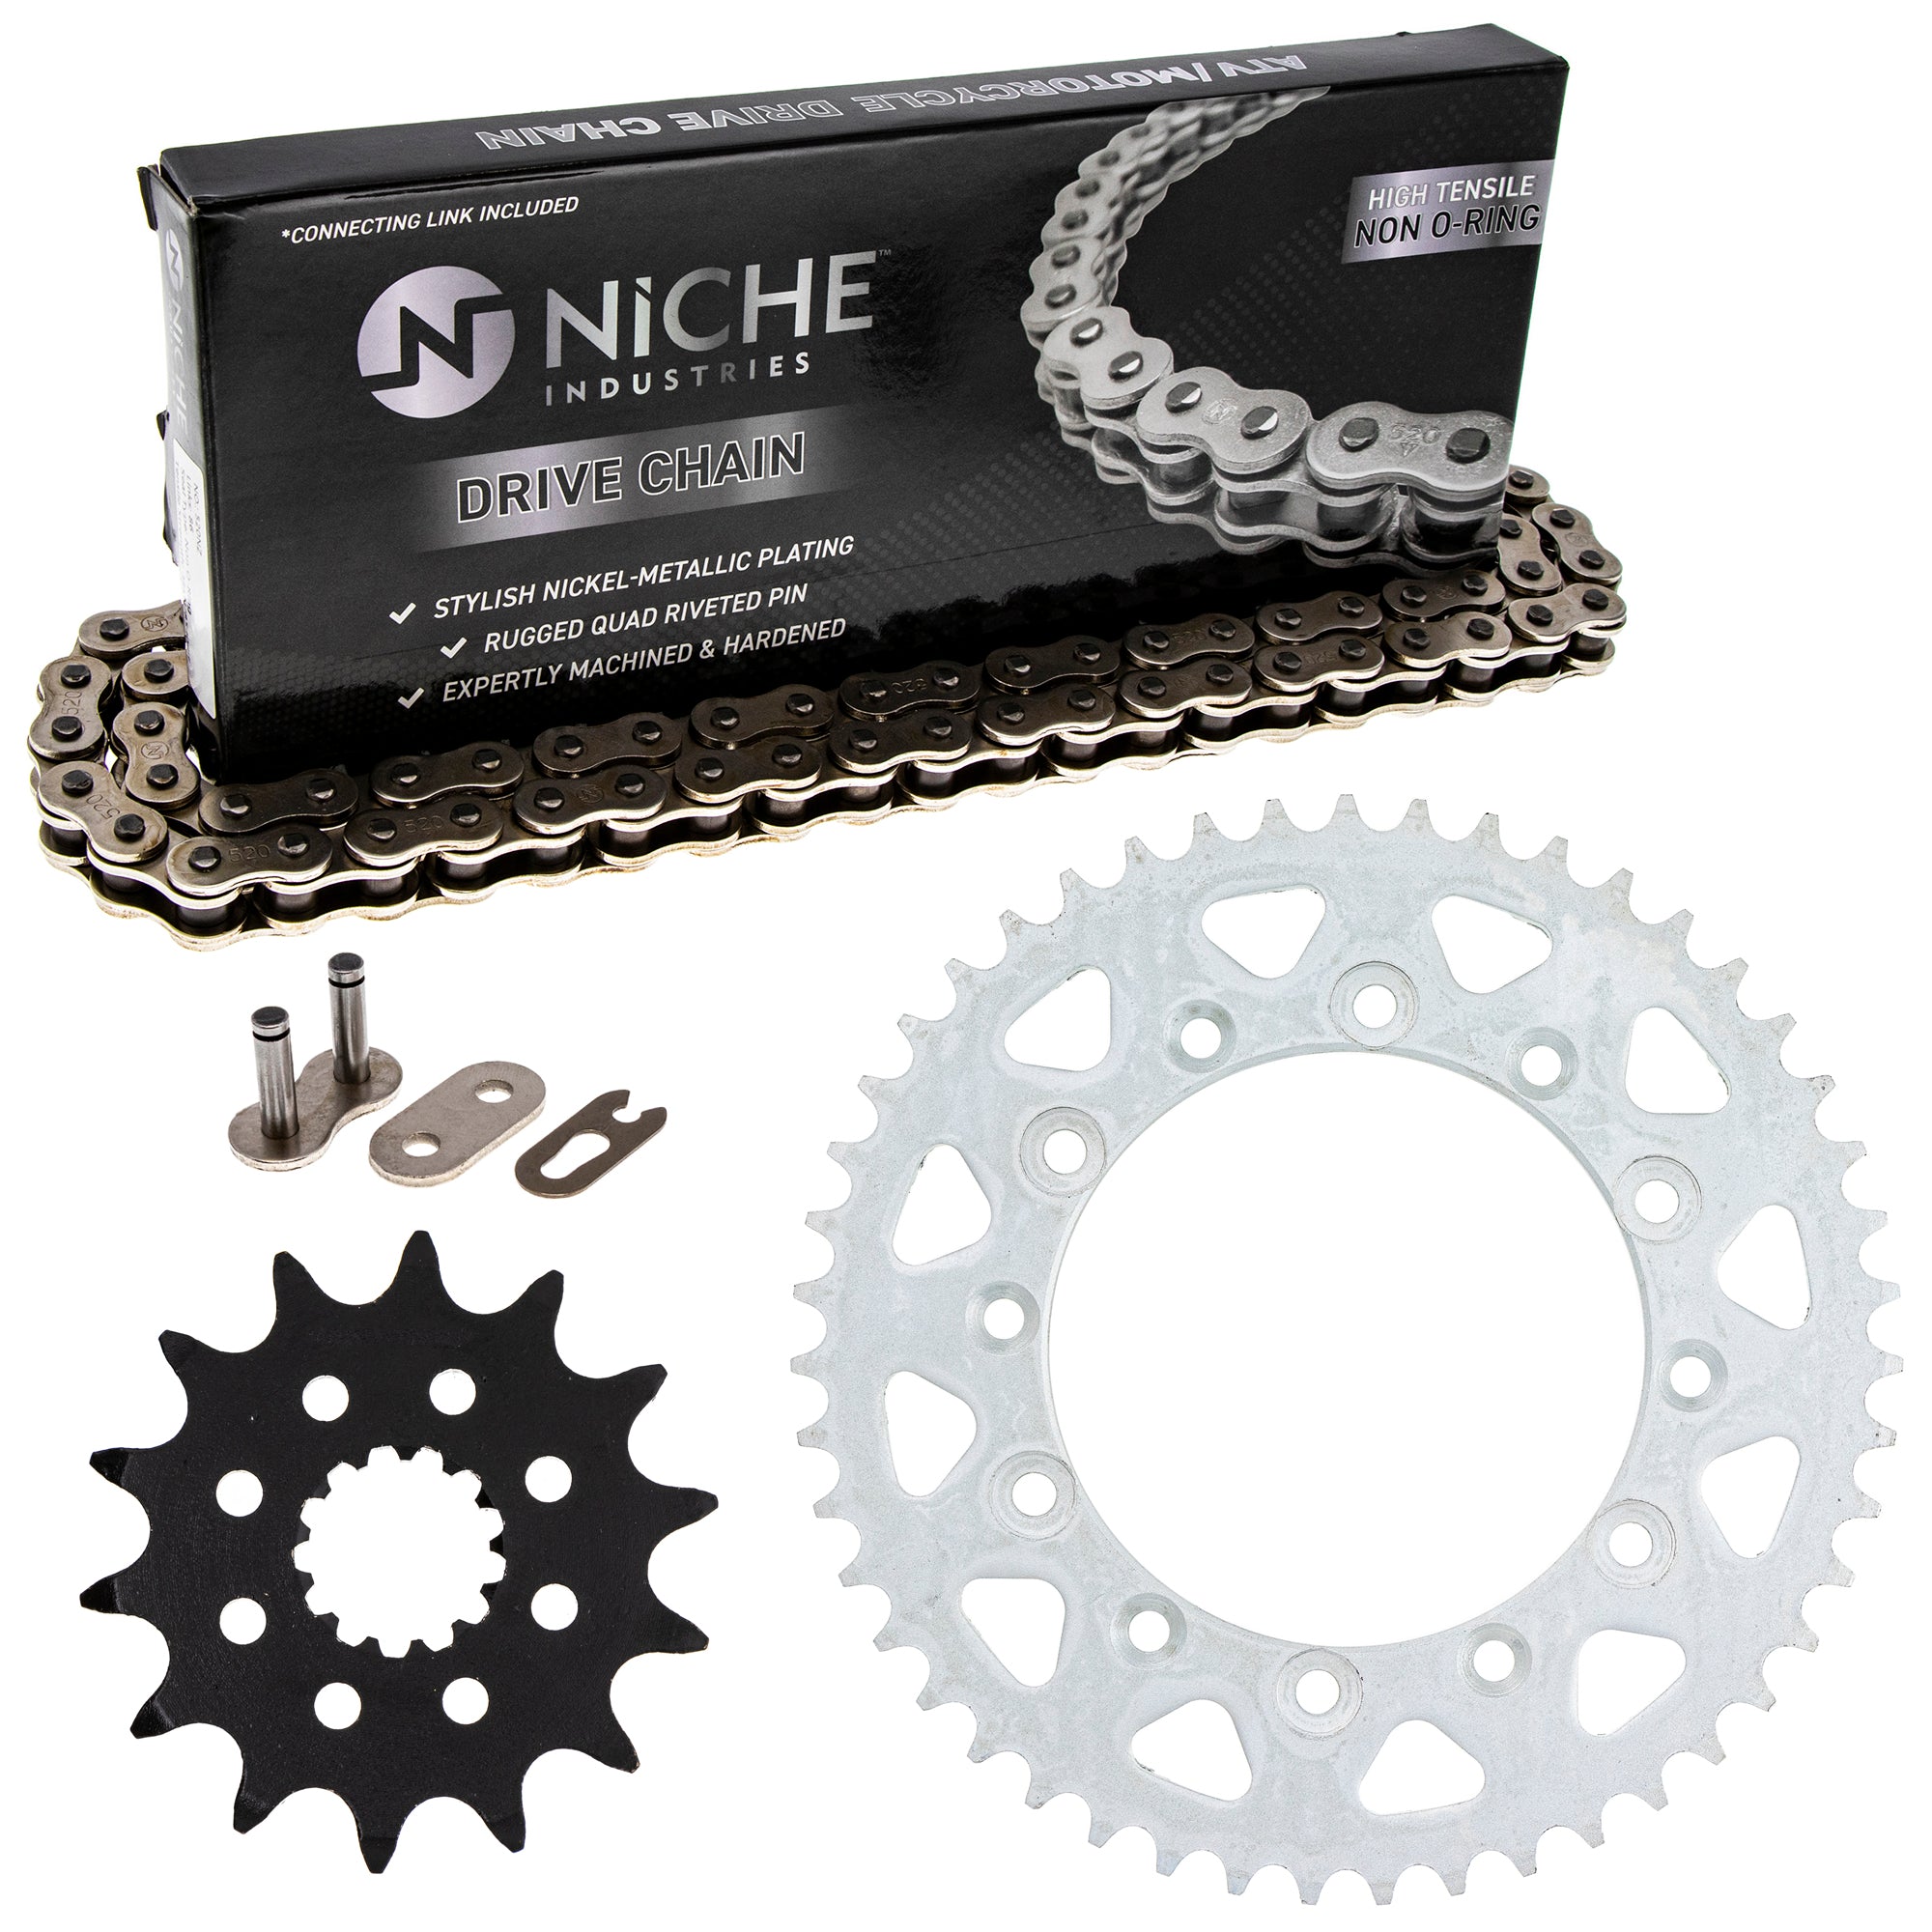 Drive Sprockets & Chain Kit for zOTHER Honda WR450F 94561-62114-00 27600-43D02-114 NICHE MK1003587